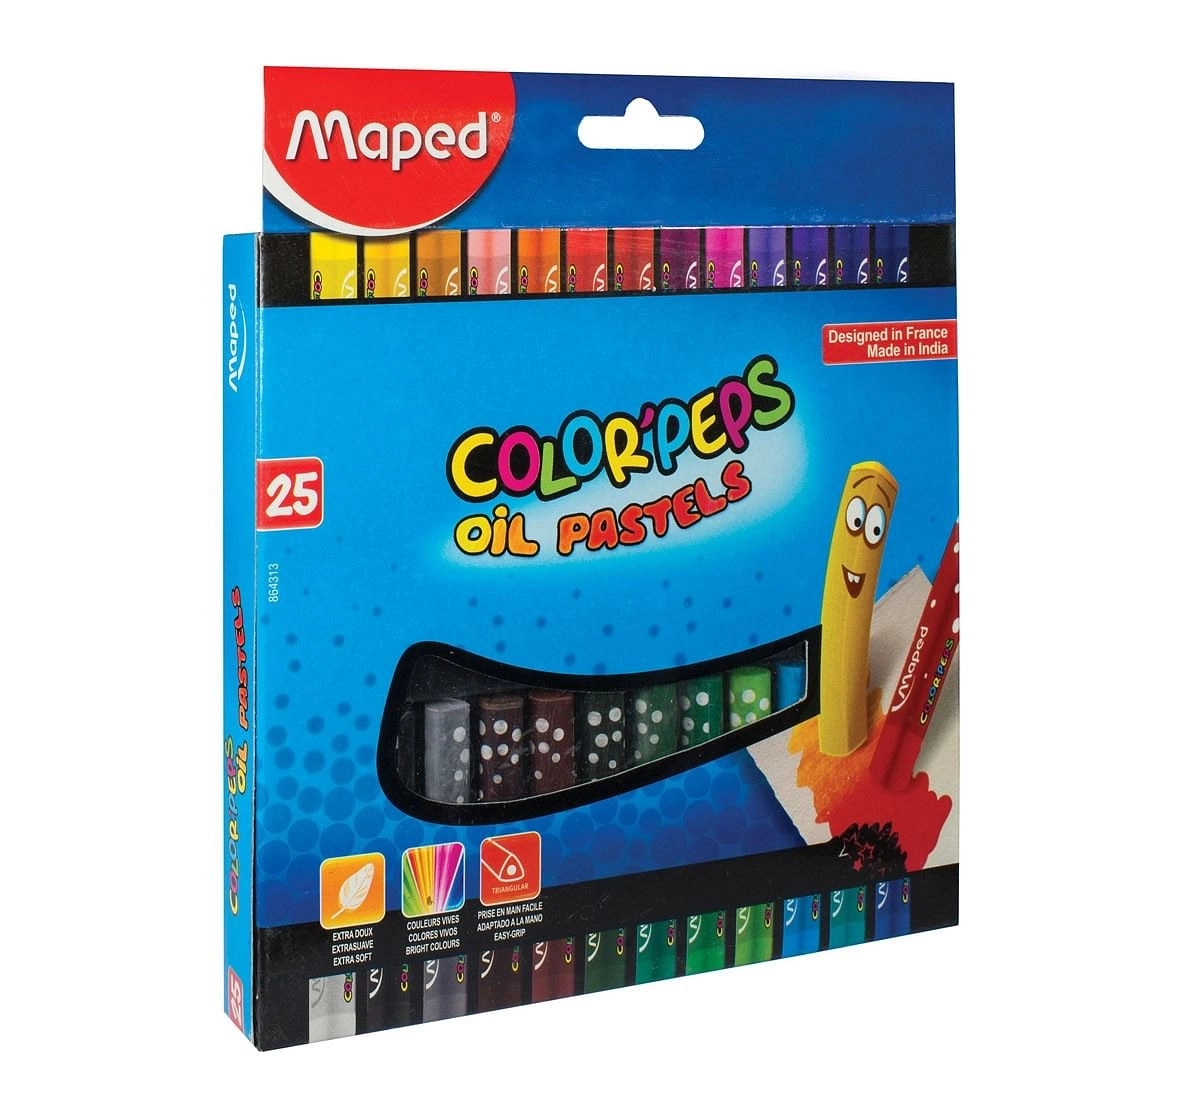 Maped Color'Peps Oil Pastels 25 Shades Cardboard Box Multicolour 7Y+